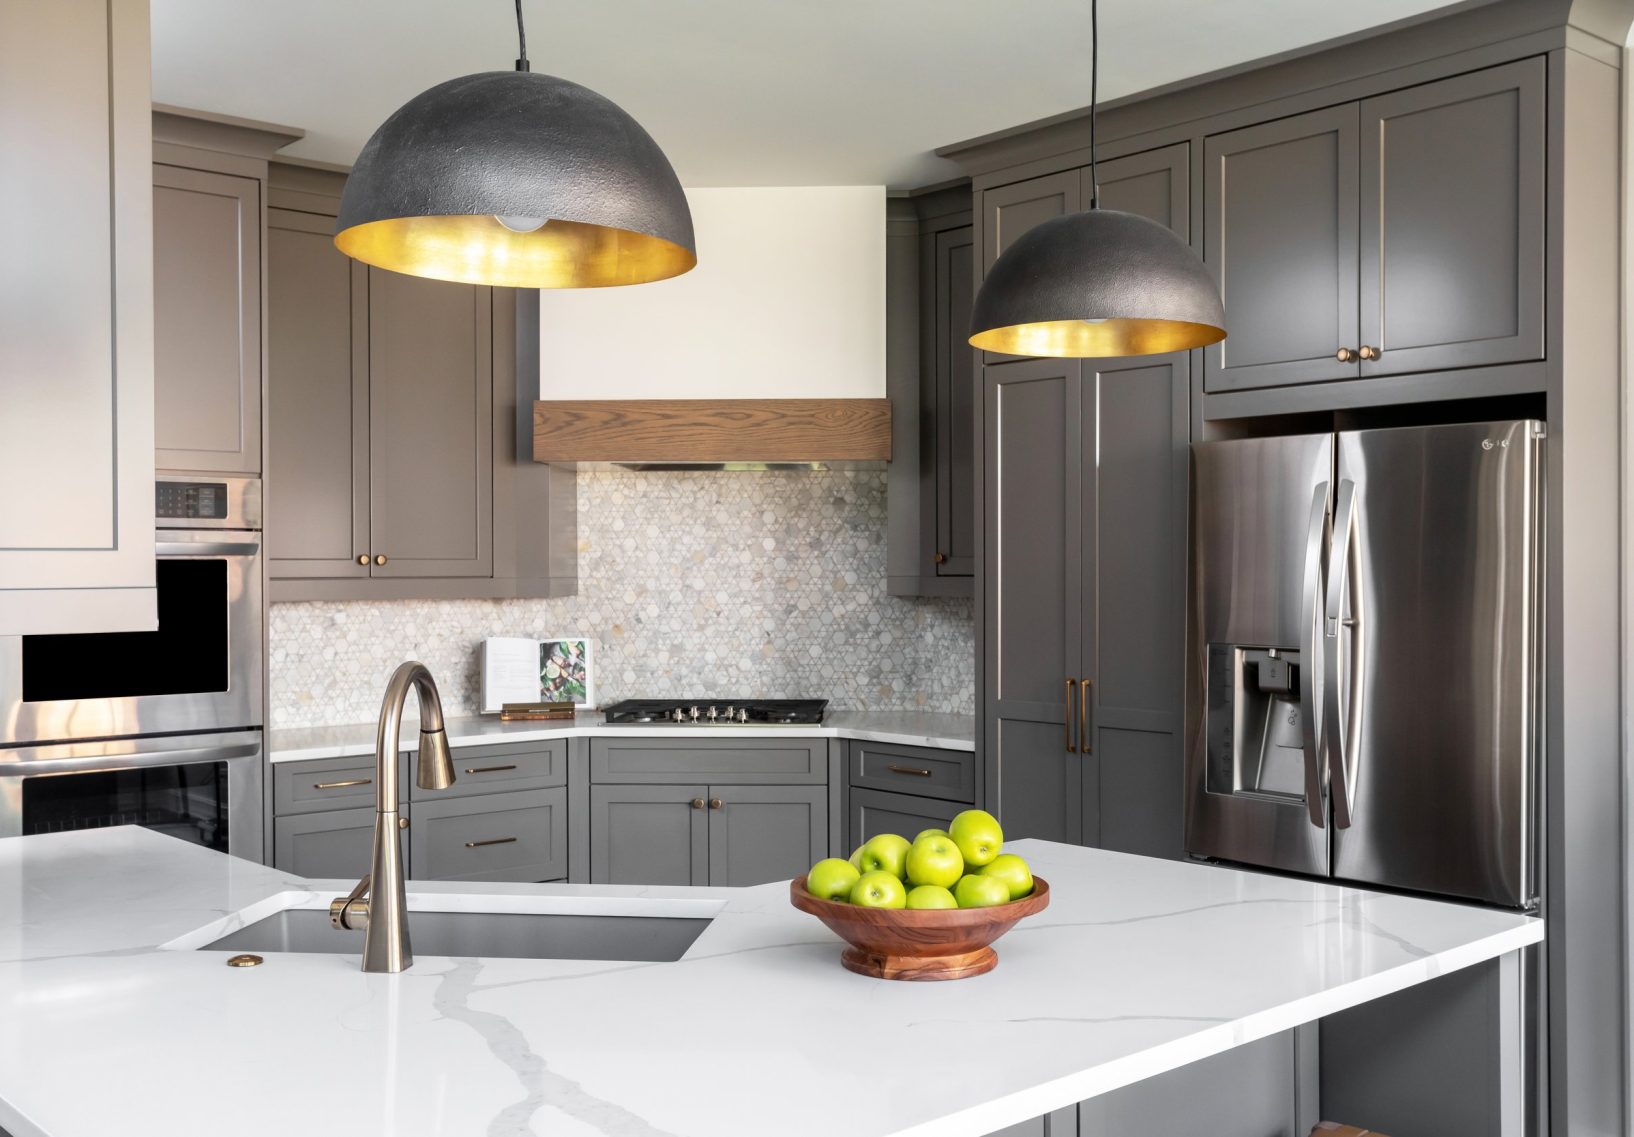 Gray, mid-century kitchen with hanging pendant lights.